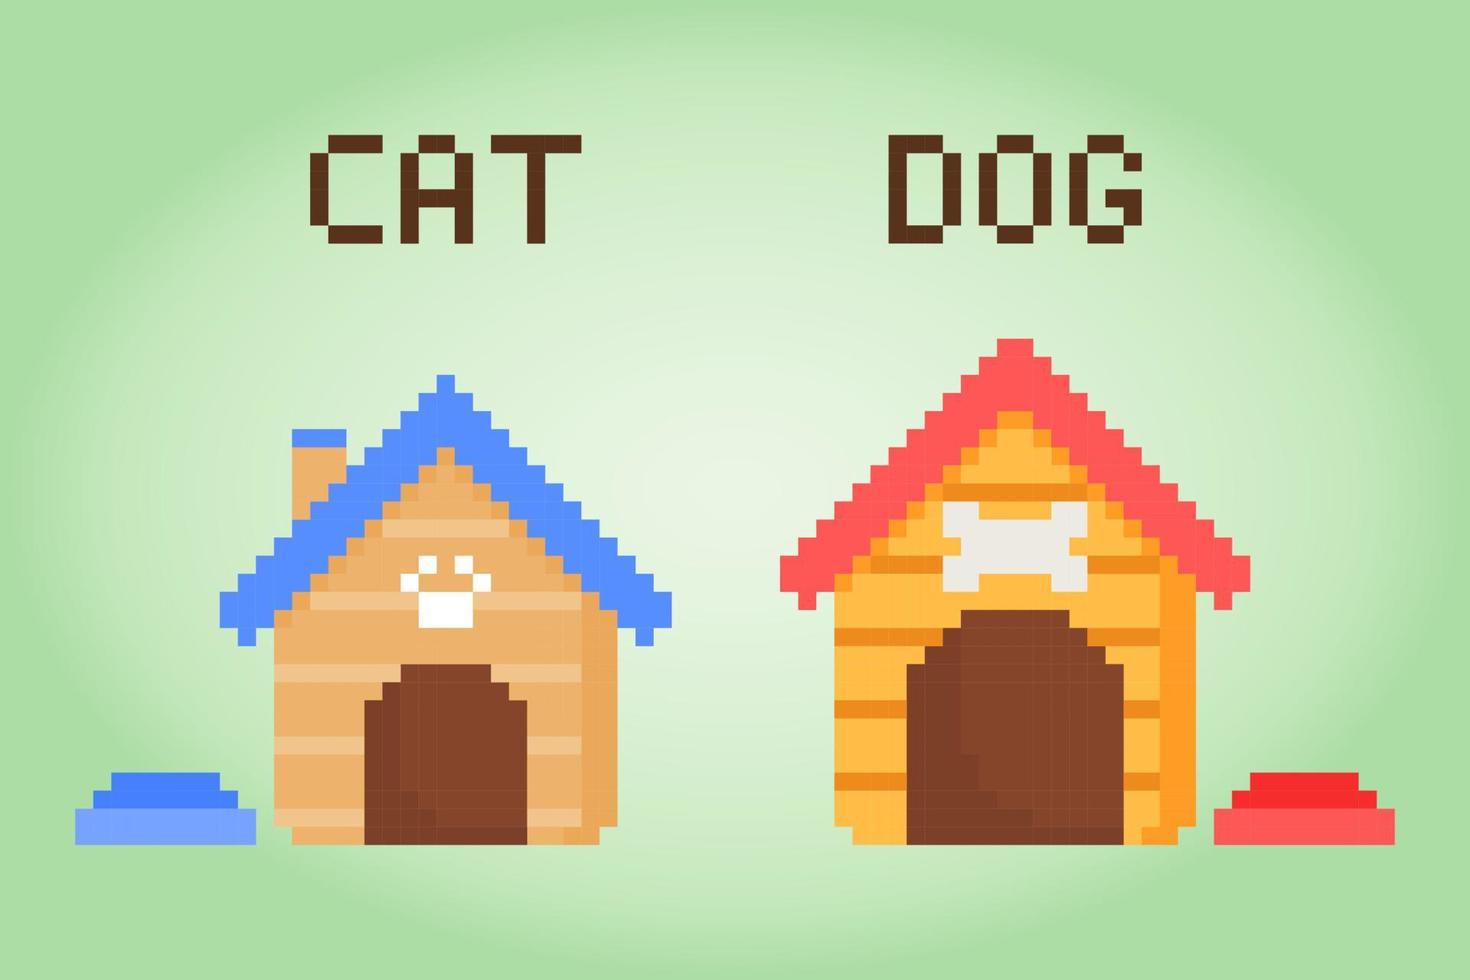 8 bit pixel house for dog and cat. barkitecture for game assets and cross stitches in vector illustrations.